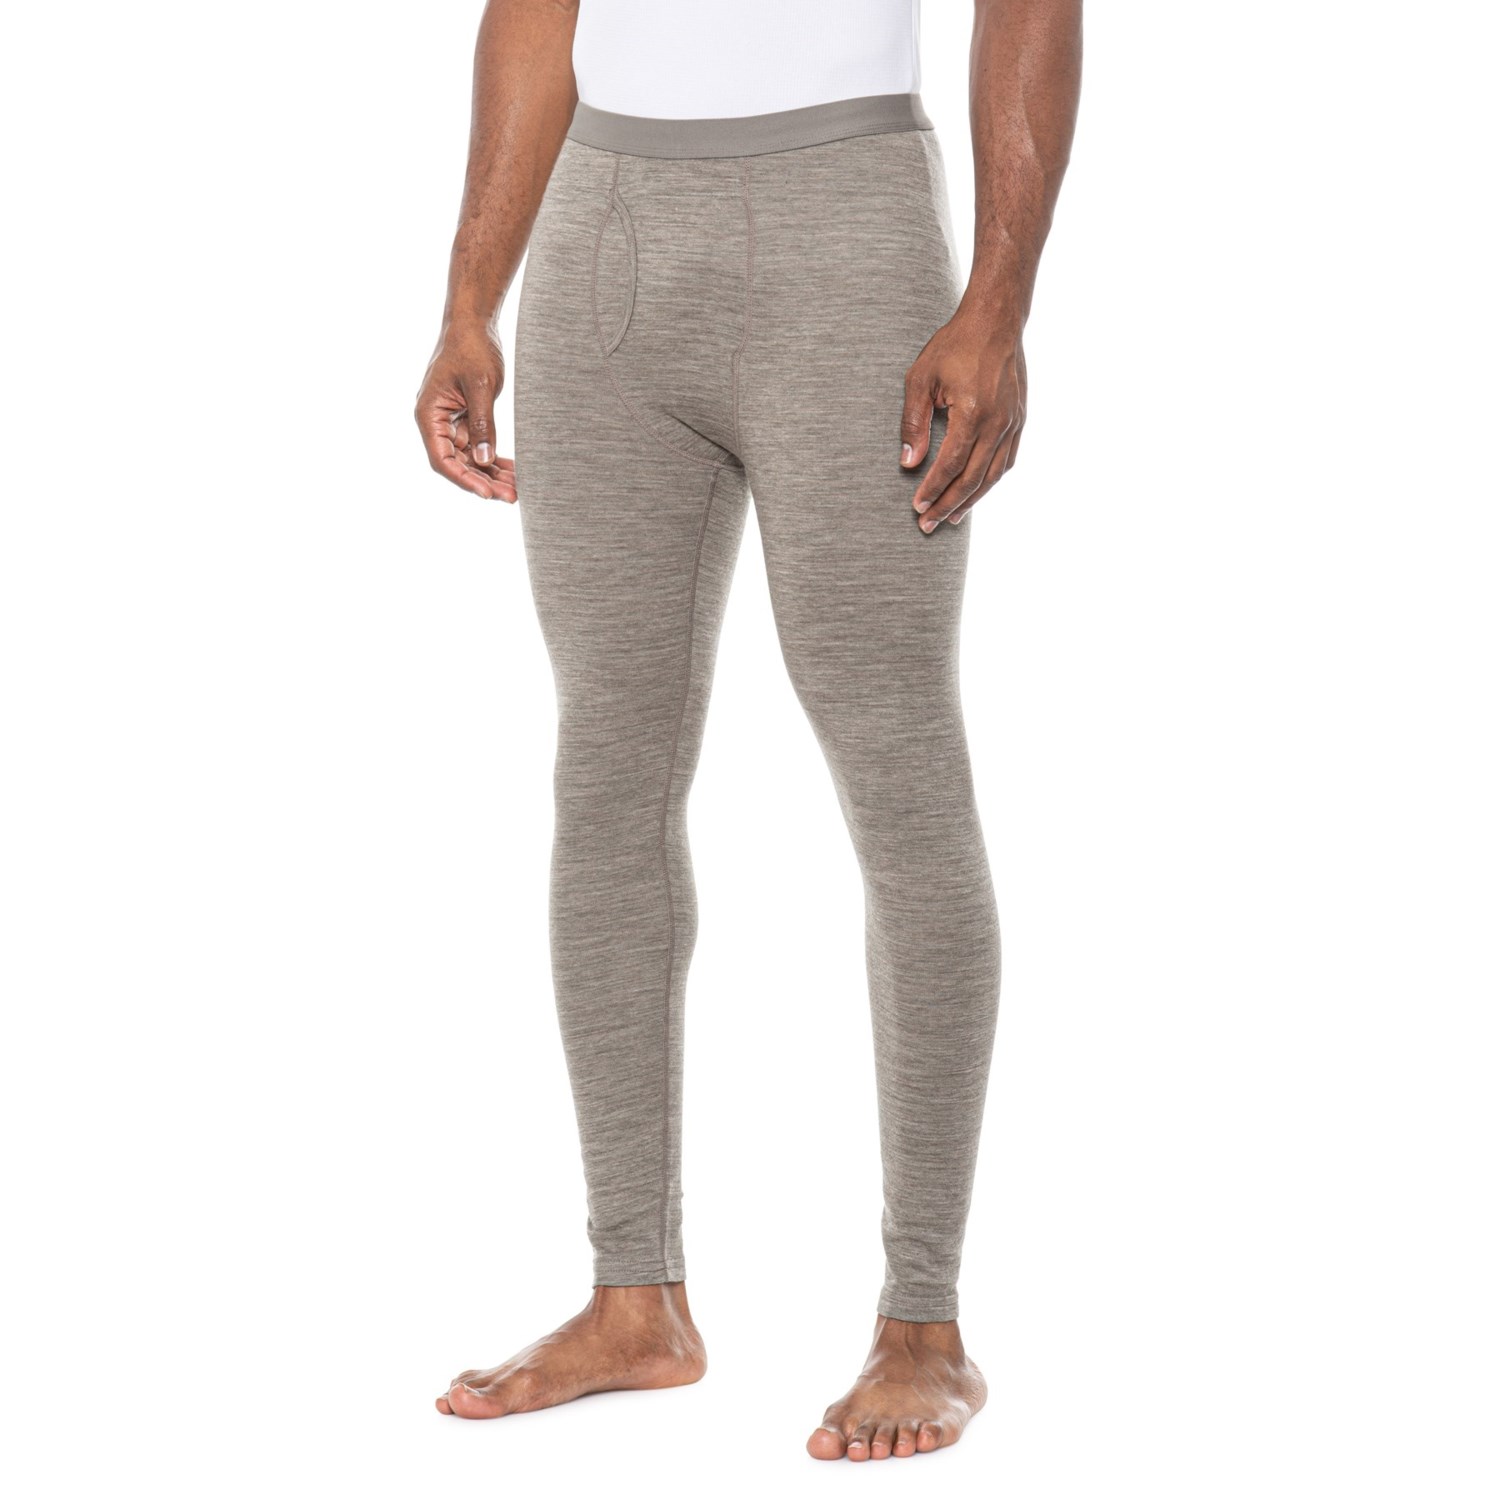 Wicked Wool Flat Packed Base Layer Bottoms - Merino Wool - Save 40%